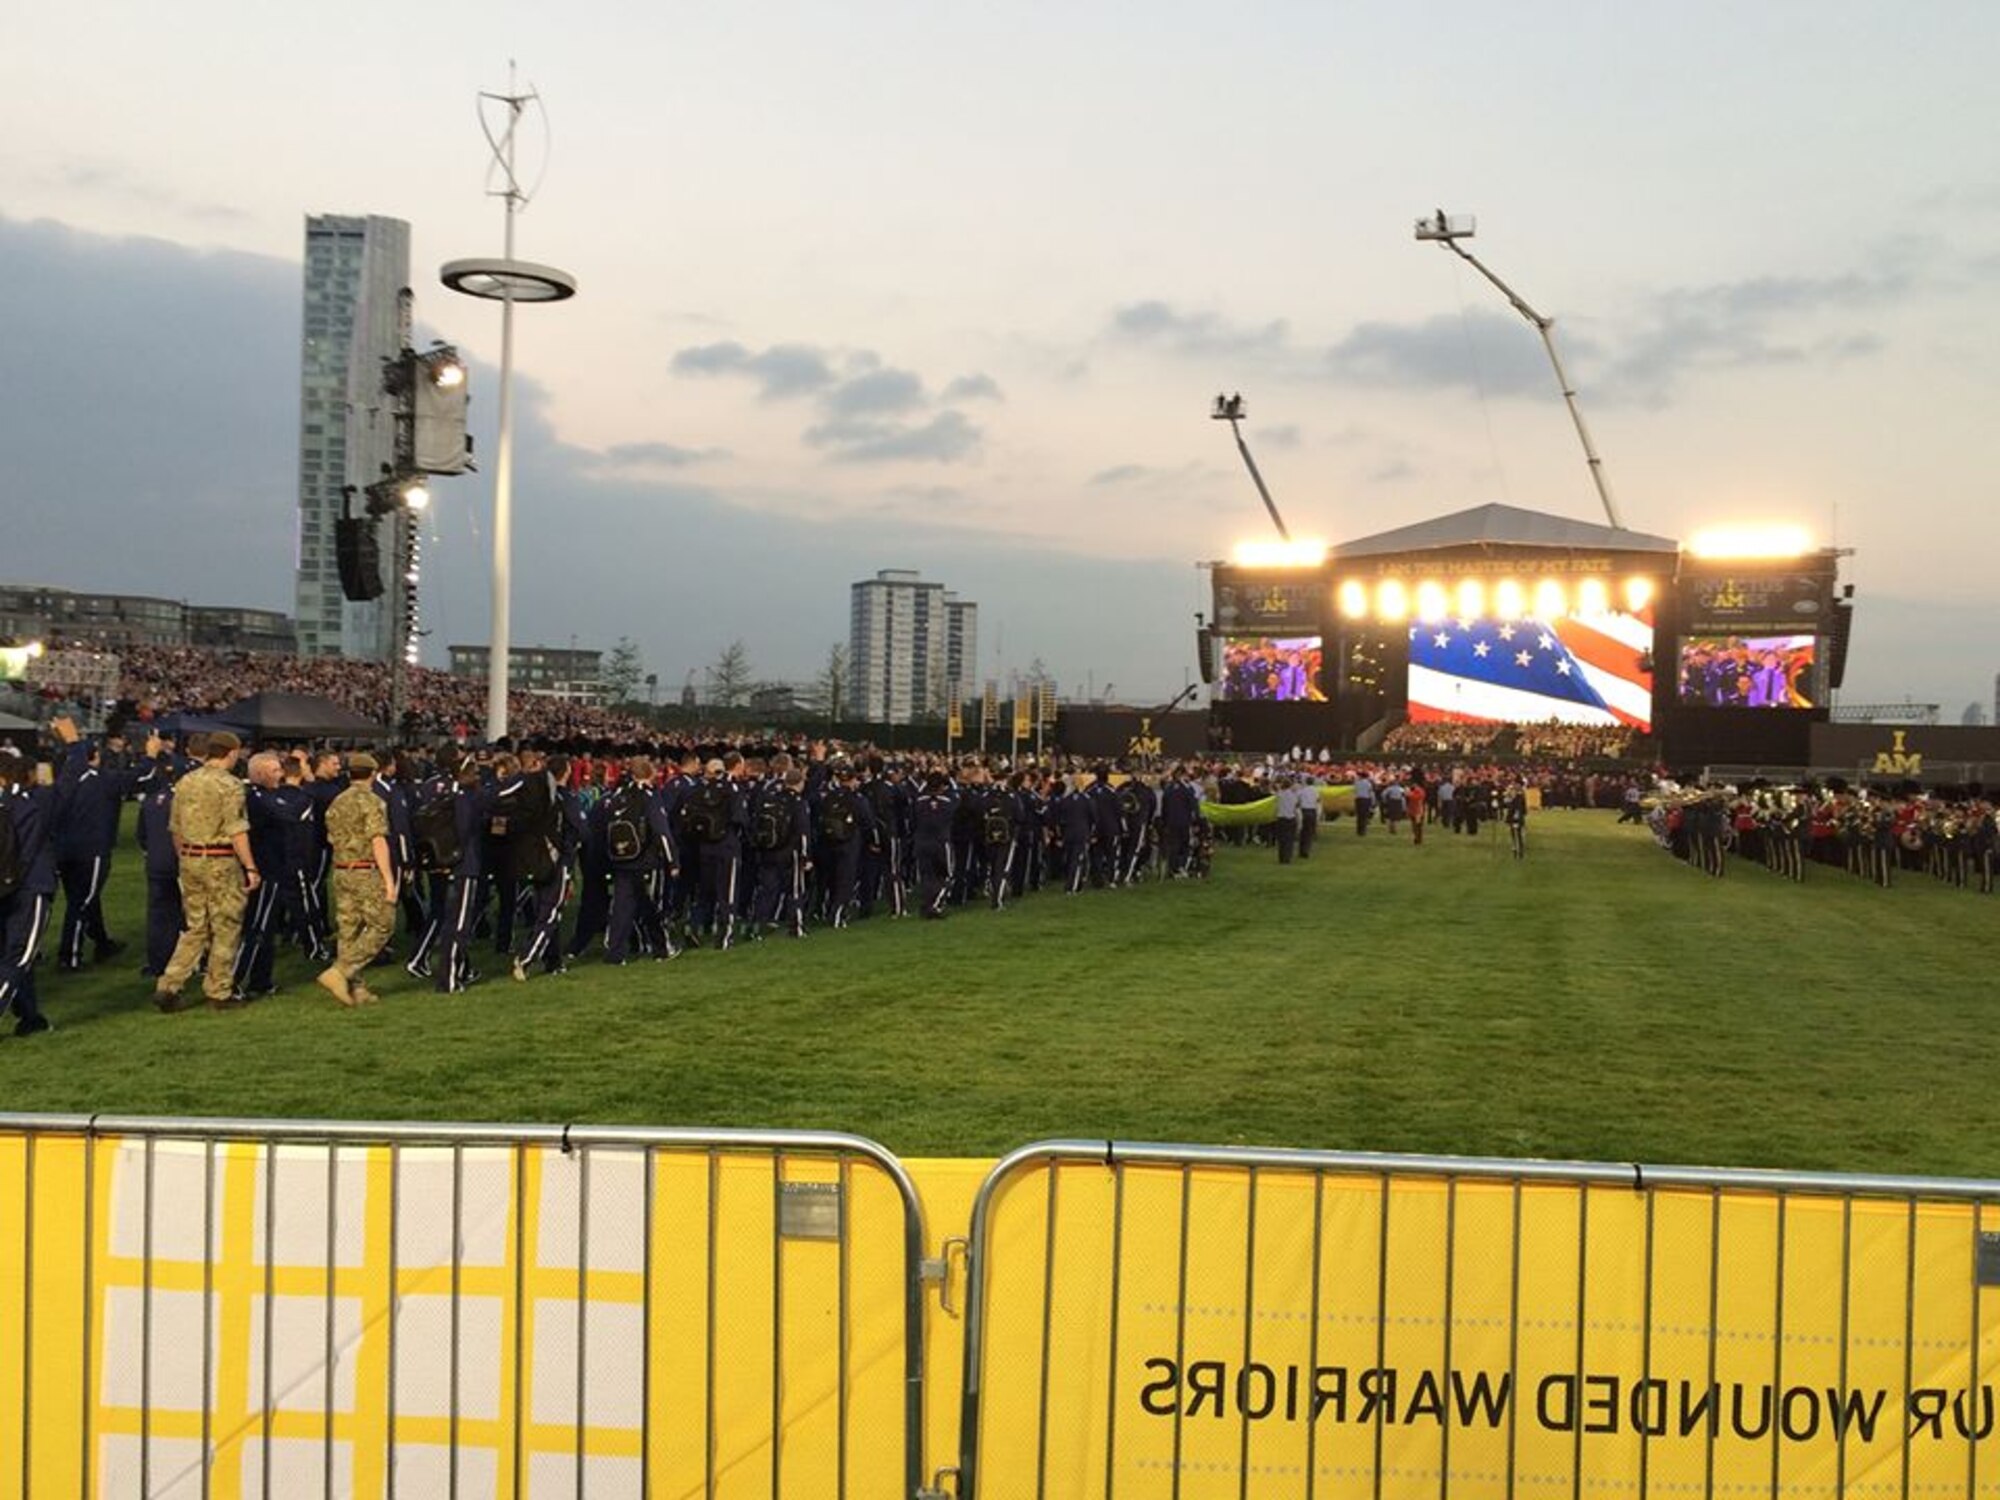 Team USA enters during the opening ceremony for the inaugural Invictus Games Sept. 10, 2014, in London. The Invictus Games are a Paralympic-style contest that features wounded warriors from different nations competing in various events. (Courtesy photo)